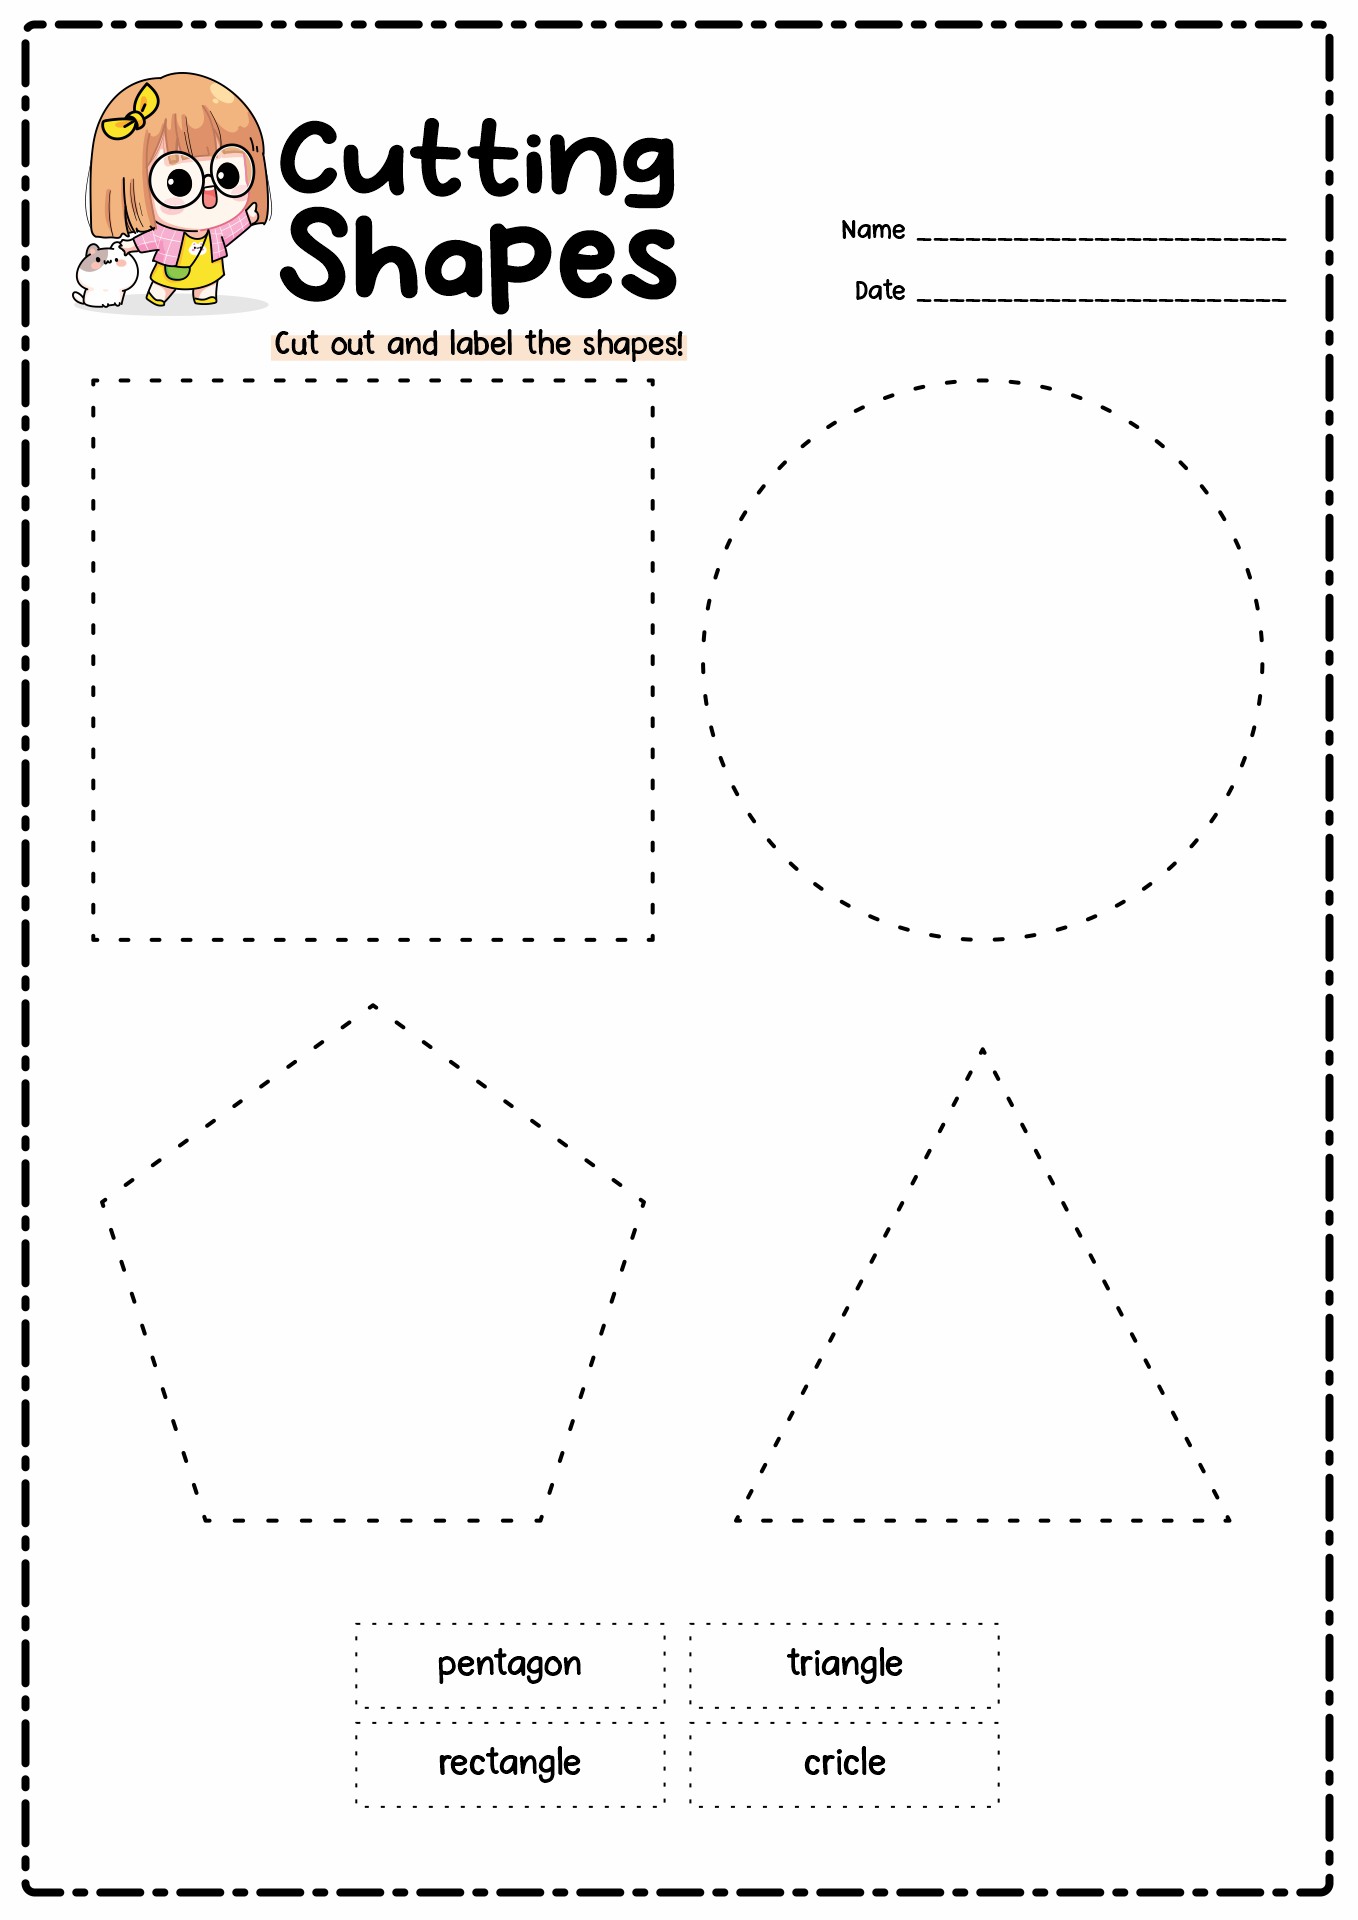 free-printable-cut-out-activities-for-preschoolers-printable-templates